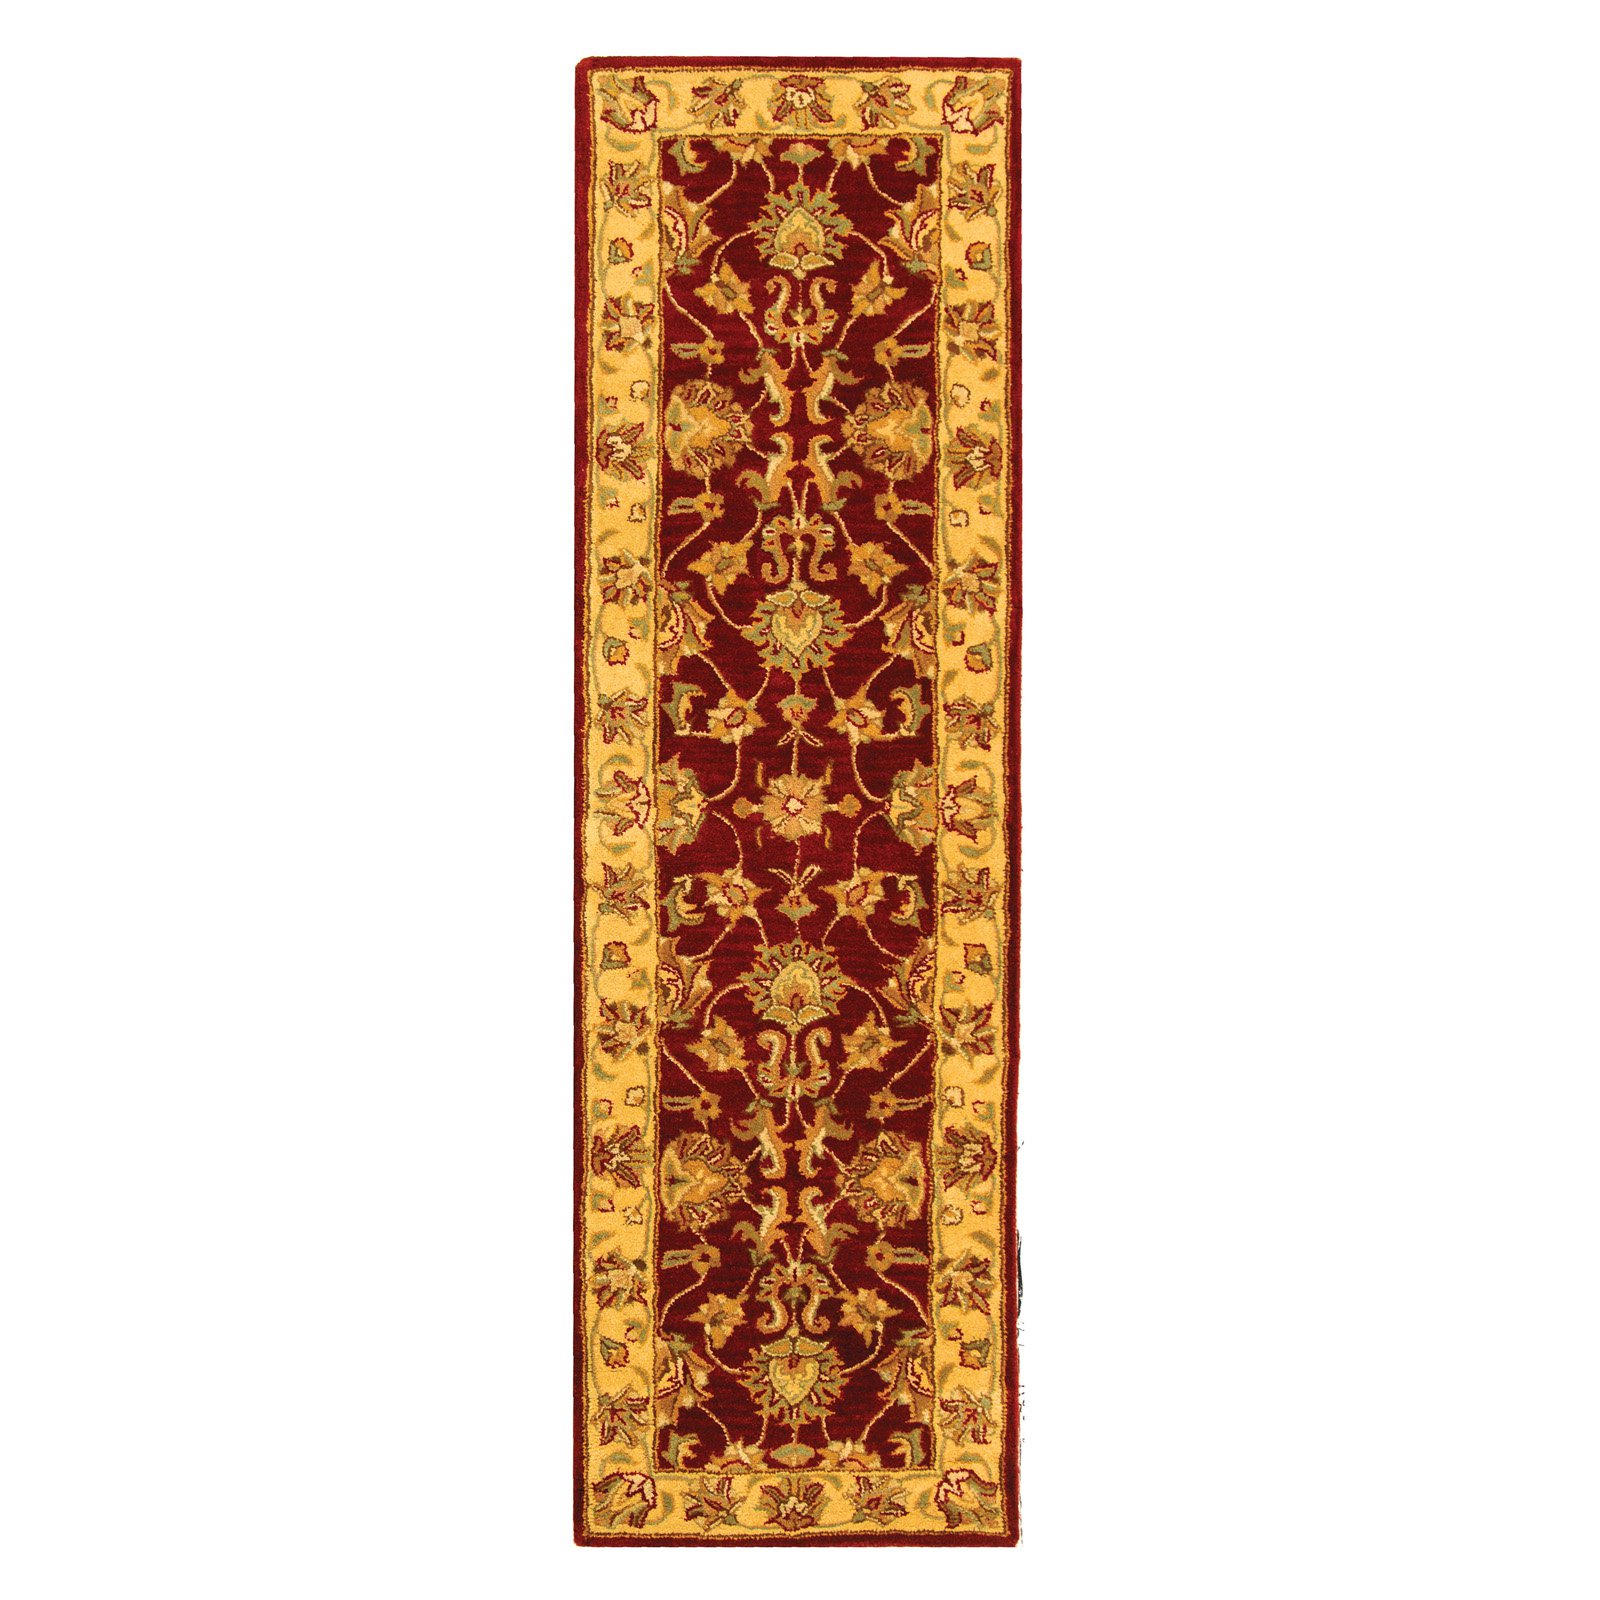 SAFAVIEH Heritage Regis Traditional Wool Area Rug, Red/Gold, 4' x 6' - image 3 of 9